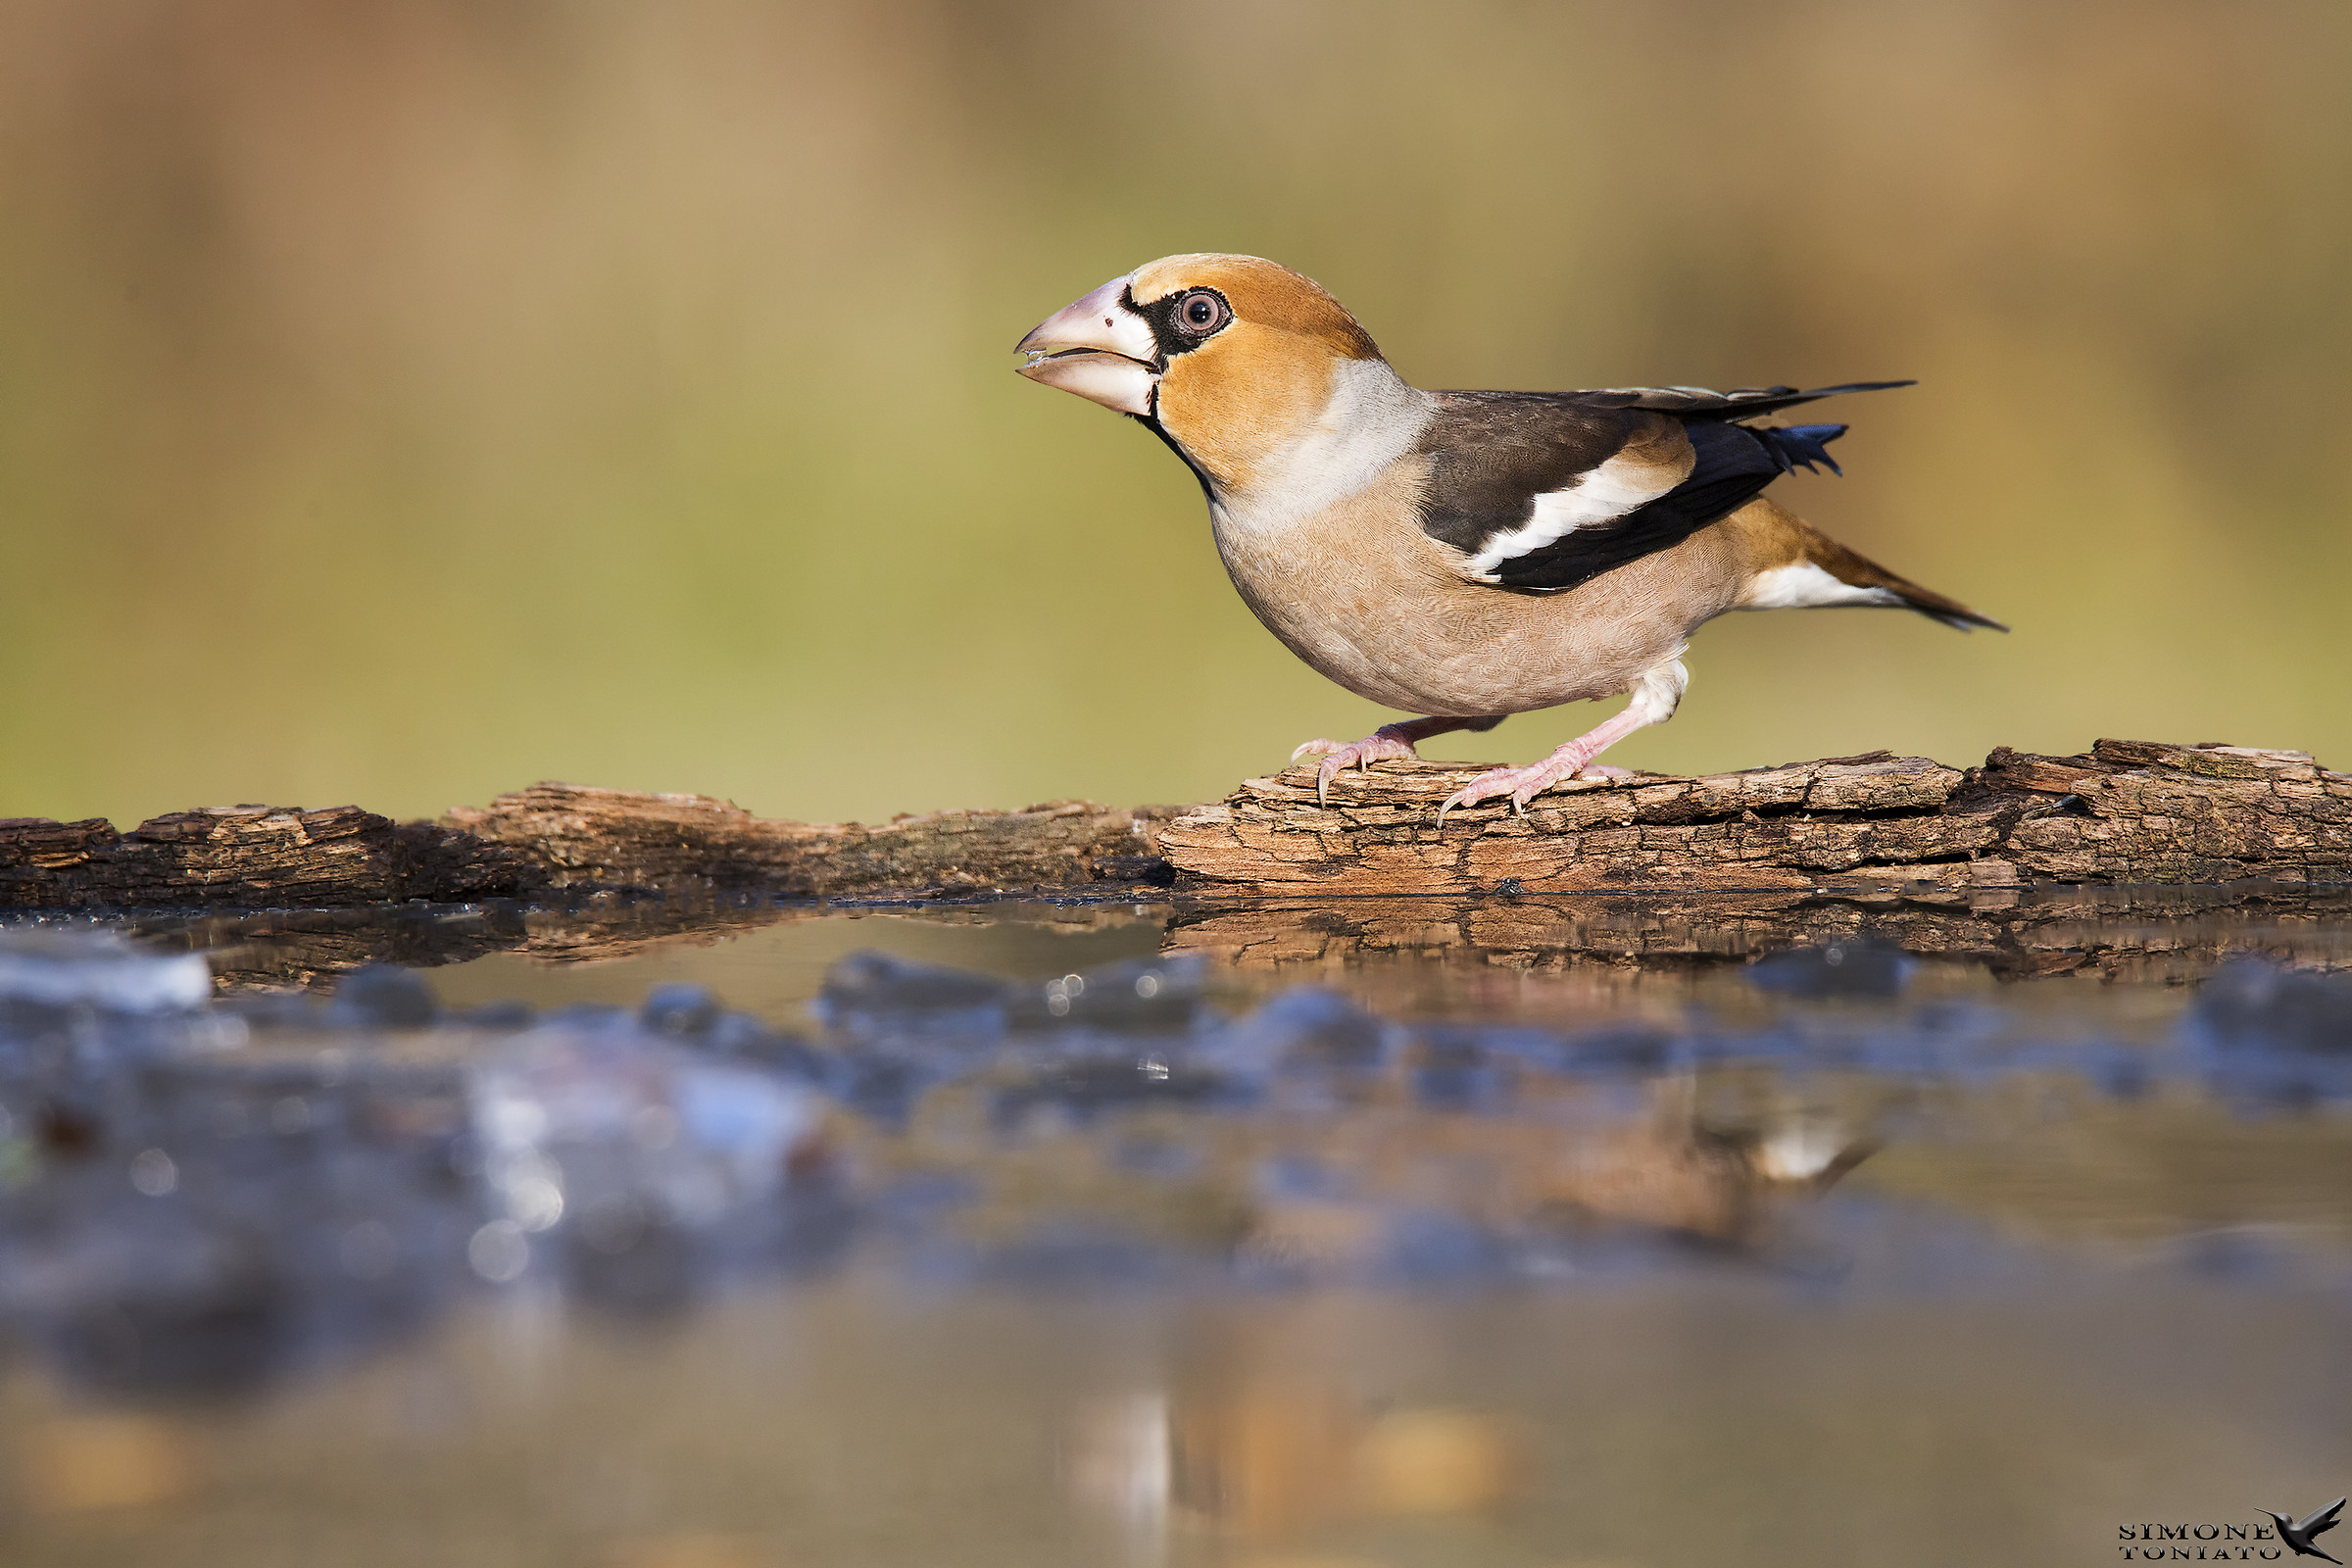 Hawfinch and the thirst-quenching pearl...